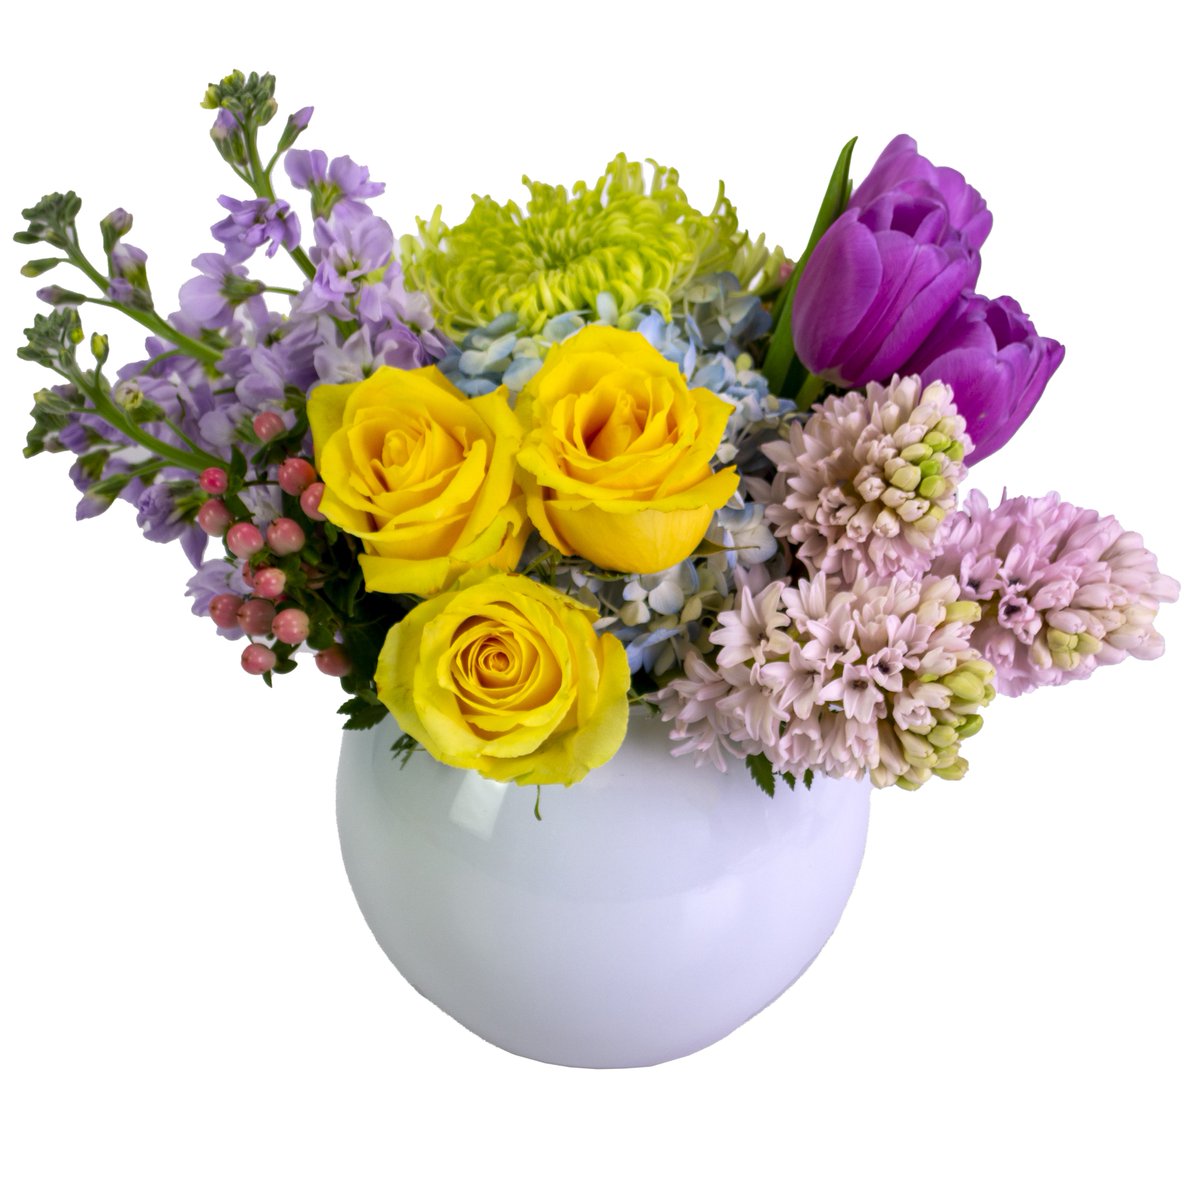 Countdown to Mother's Day continues...5 days to go. 💐 If you need an out-of-town delivery - order today by calling 703-281-4141! Don't forget to thank the teachers and nurses in your life this week too. #Mothersday2024 #florist #nursesweek #TeacherAppreciationWeek #ViennaVA